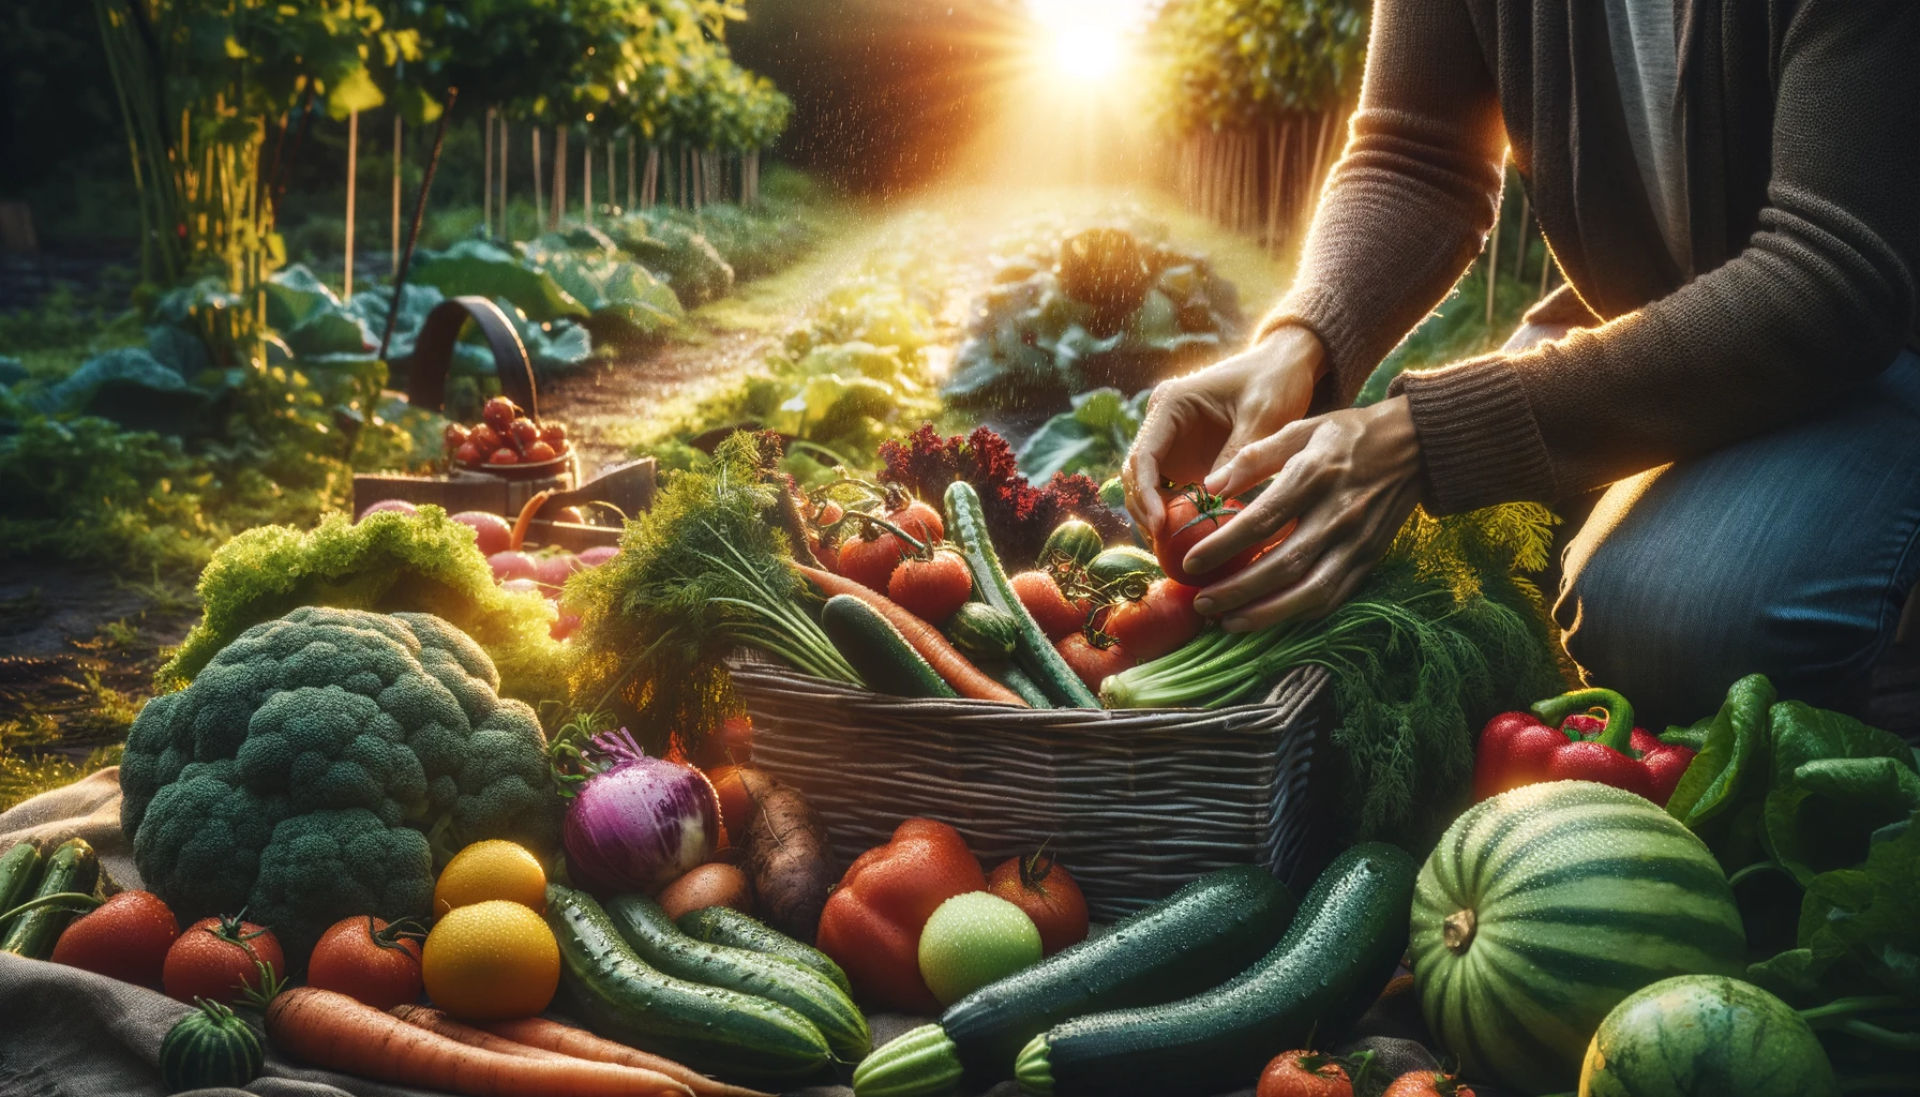 Harvesting and Storing Biodynamic Produce: The second image illustrates the harvesting process in a biodynamic garden. It emphasizes the vibrancy and diversity of the produce, showcasing the freshness and abundance yielded by these practices.